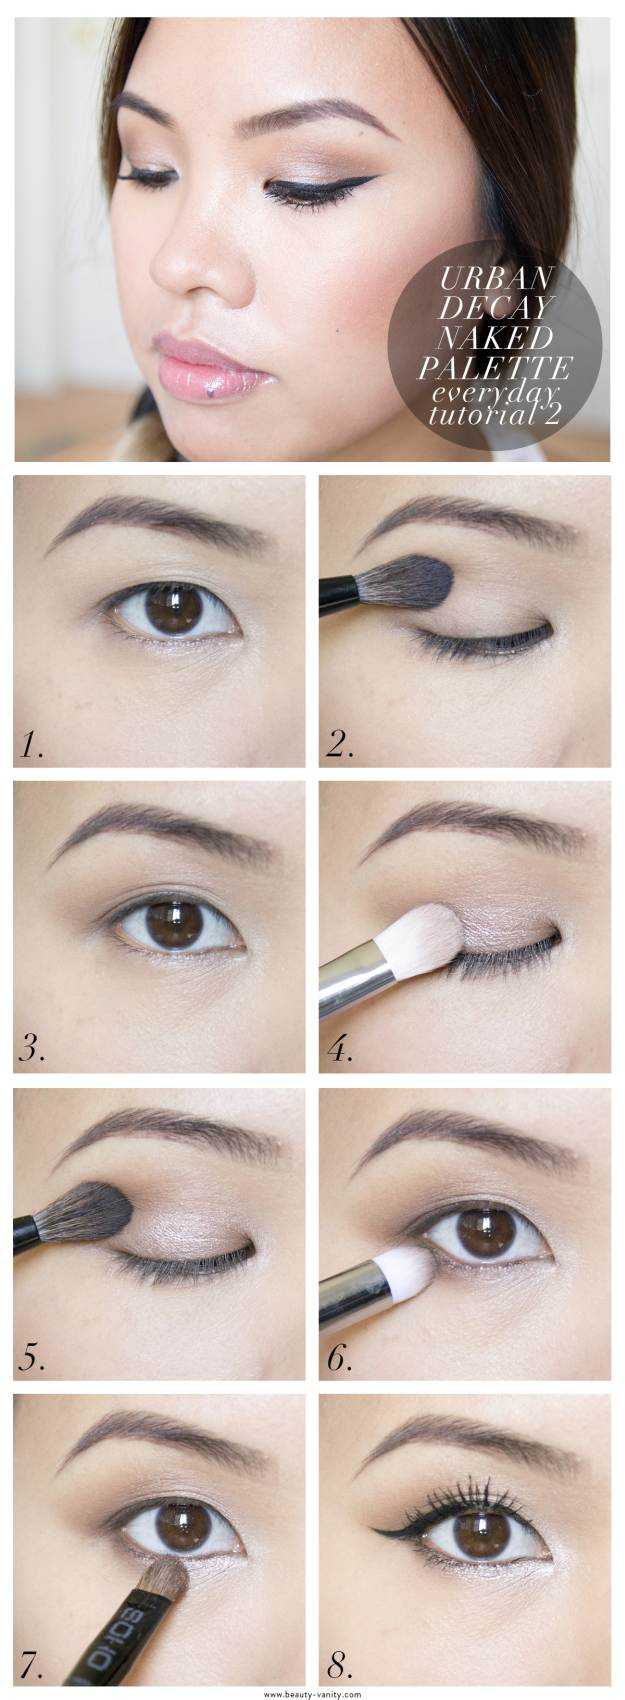 Day Makeup Brown Eyes Gorgeous Easy Makeup Tutorials For Brown Eyes Makeup Tutorials